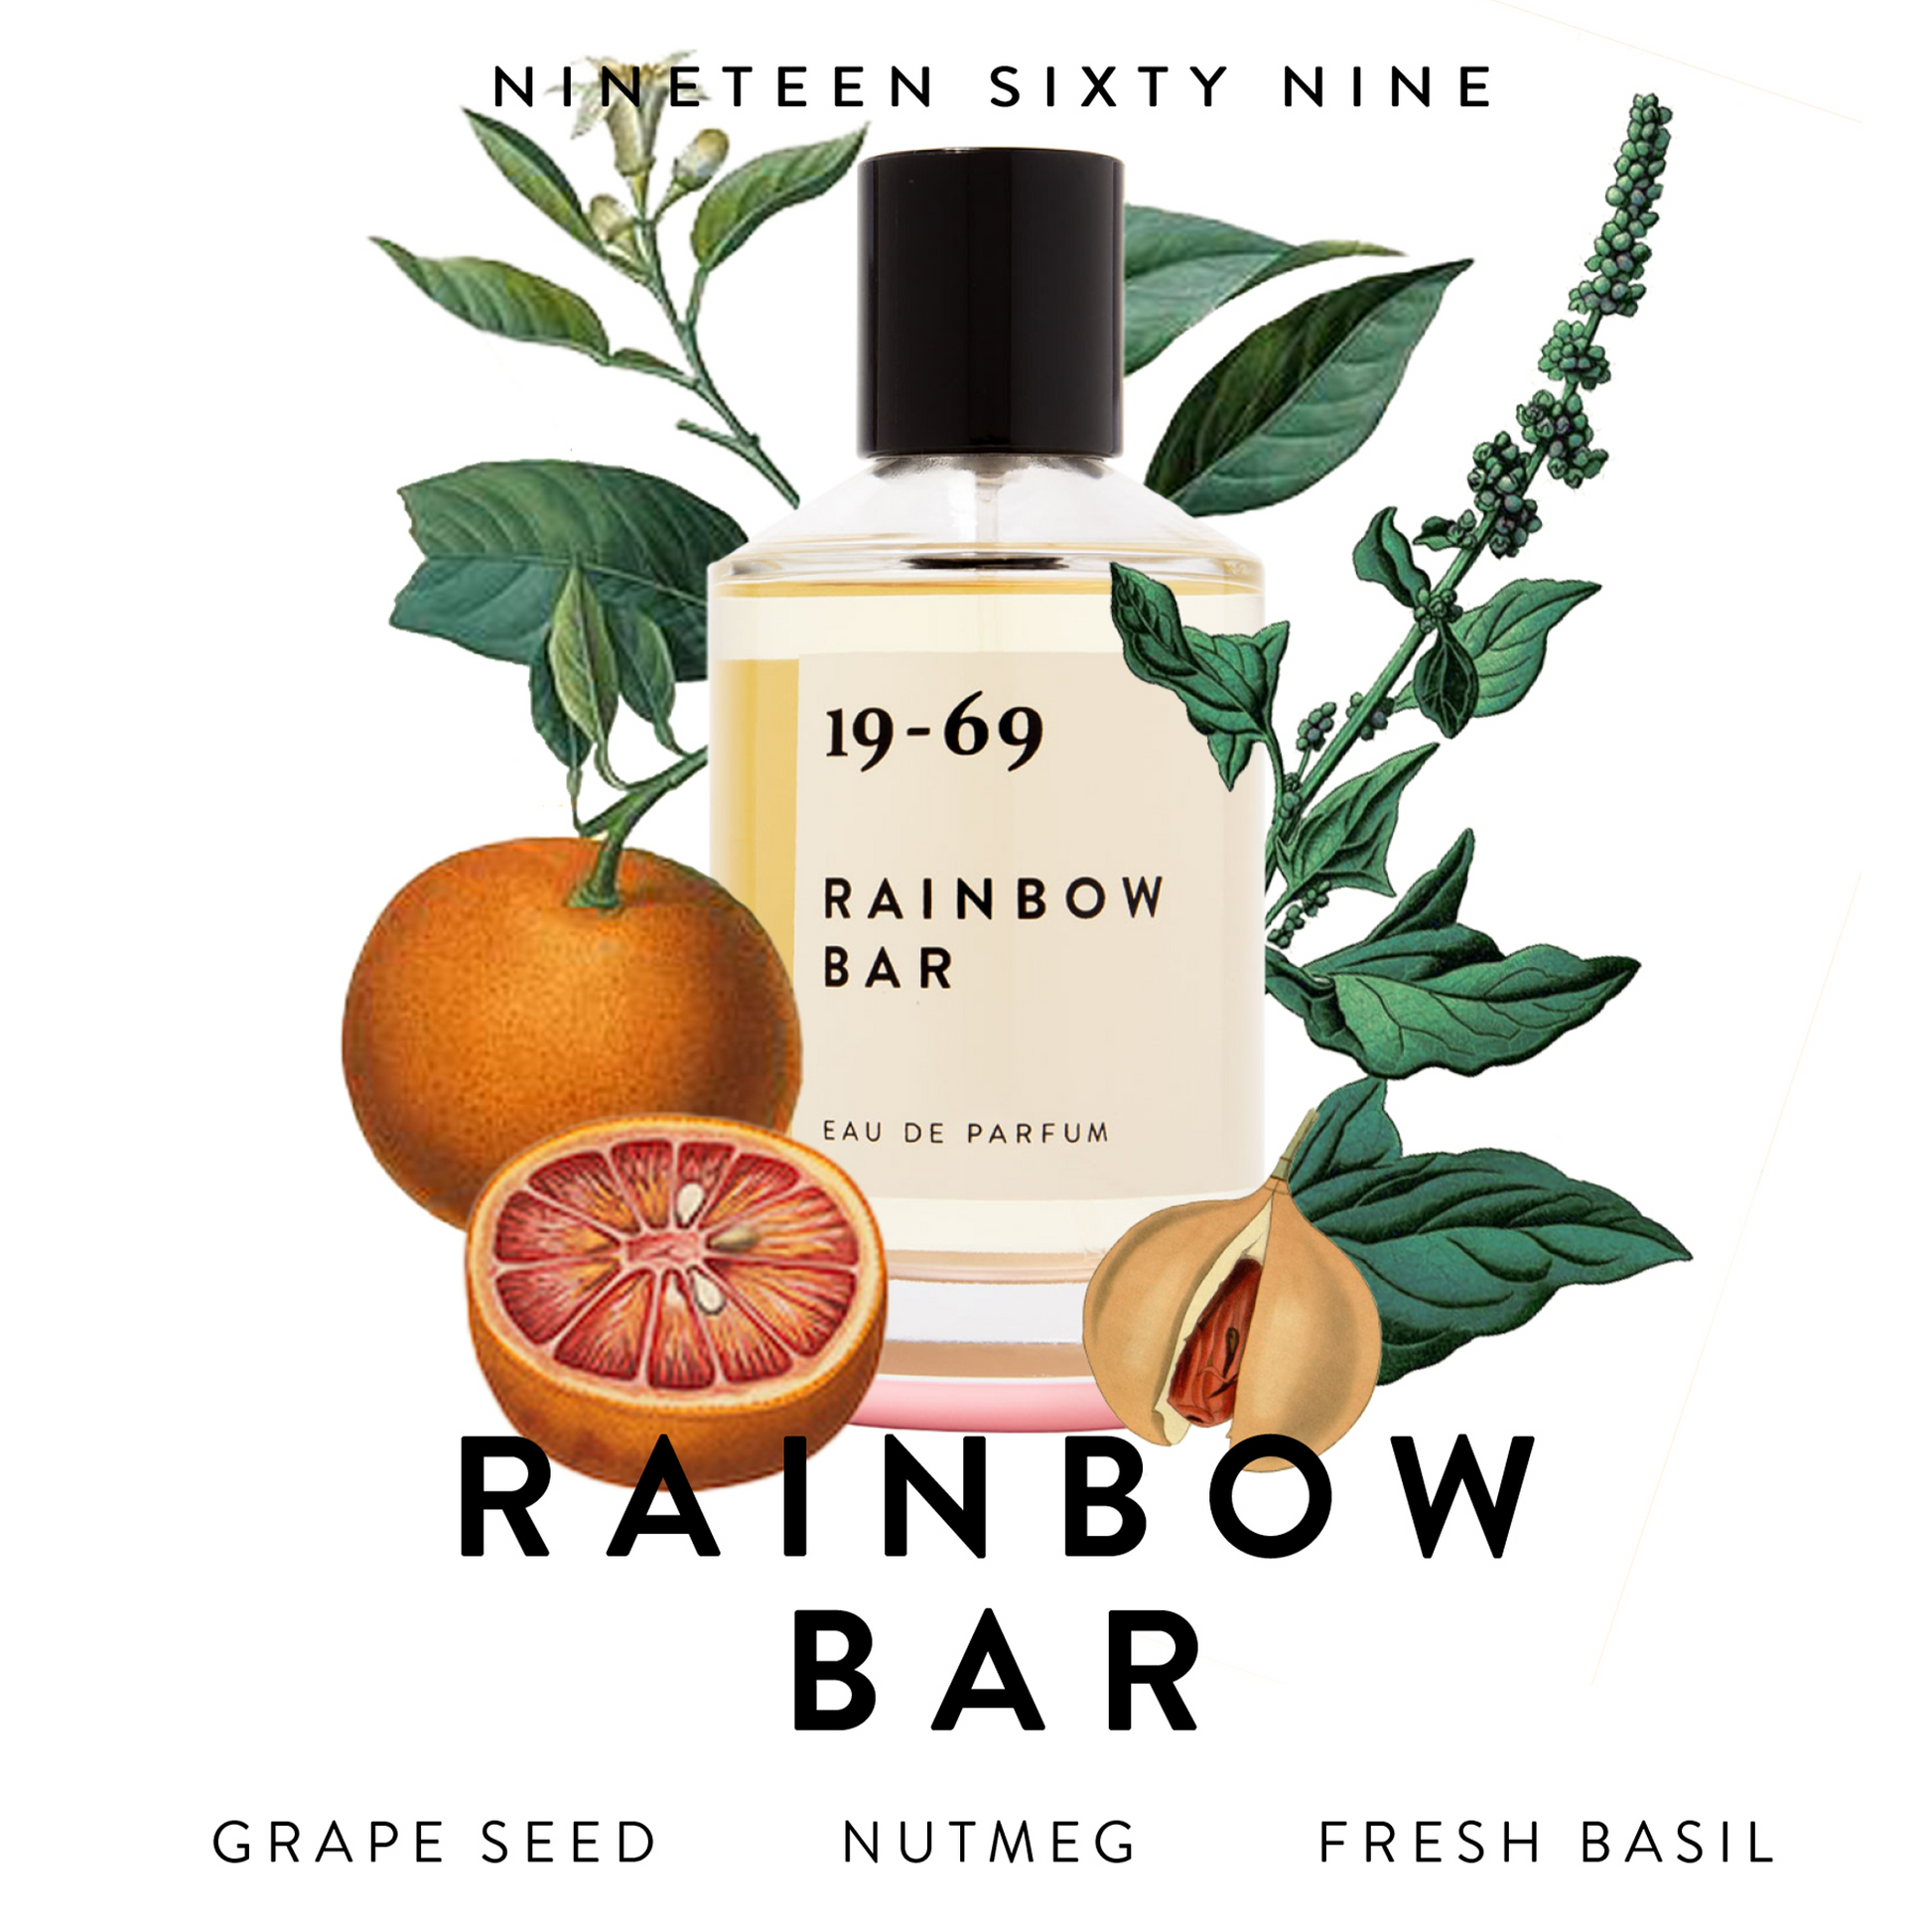 19-69 Rainbow Bar Perfume: Rainbow Bar is evocative of the 1980s glamrock era in LA and the music scene and lifestyle of the US West Coast during the 1960s and 1970s. Elements like the sun, the blue skies and warm glow that embrace LA.  Rainbow Bar fragrance notes include Bergamot, Bourbon and Vetyver. All 19-69 fragrances are suitable for any gender.